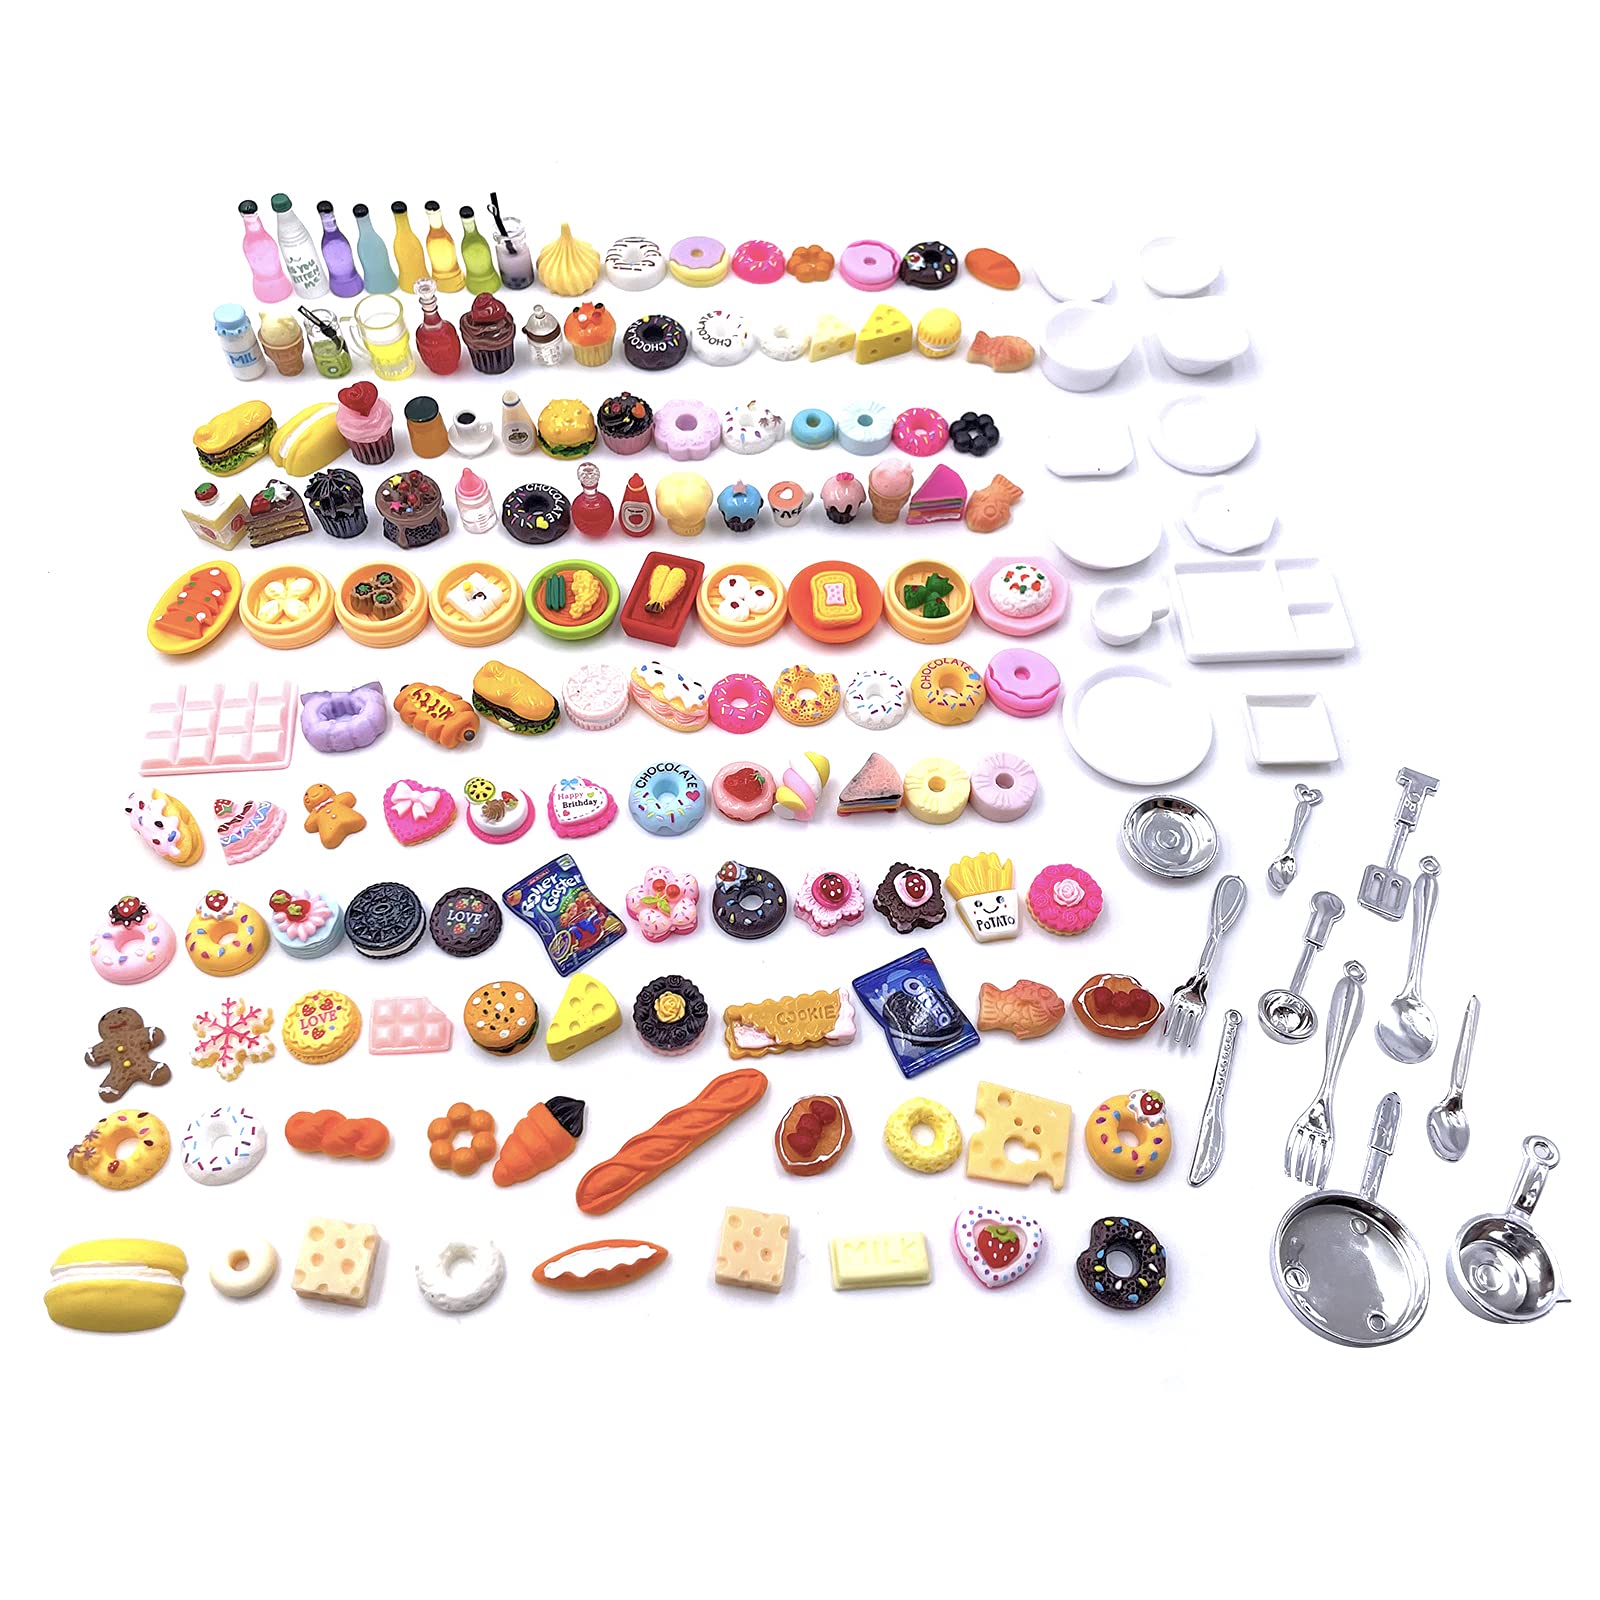 HKLMRO 150Pcs Miniature Food Drink Bottles Adults Dollhouse Soda Pop Cans Pretend Play Kitchen Cooking Game Party Accessories Toys Hamburger Cake Ice Cream Pizza Bread Tableware Doll House Landscape